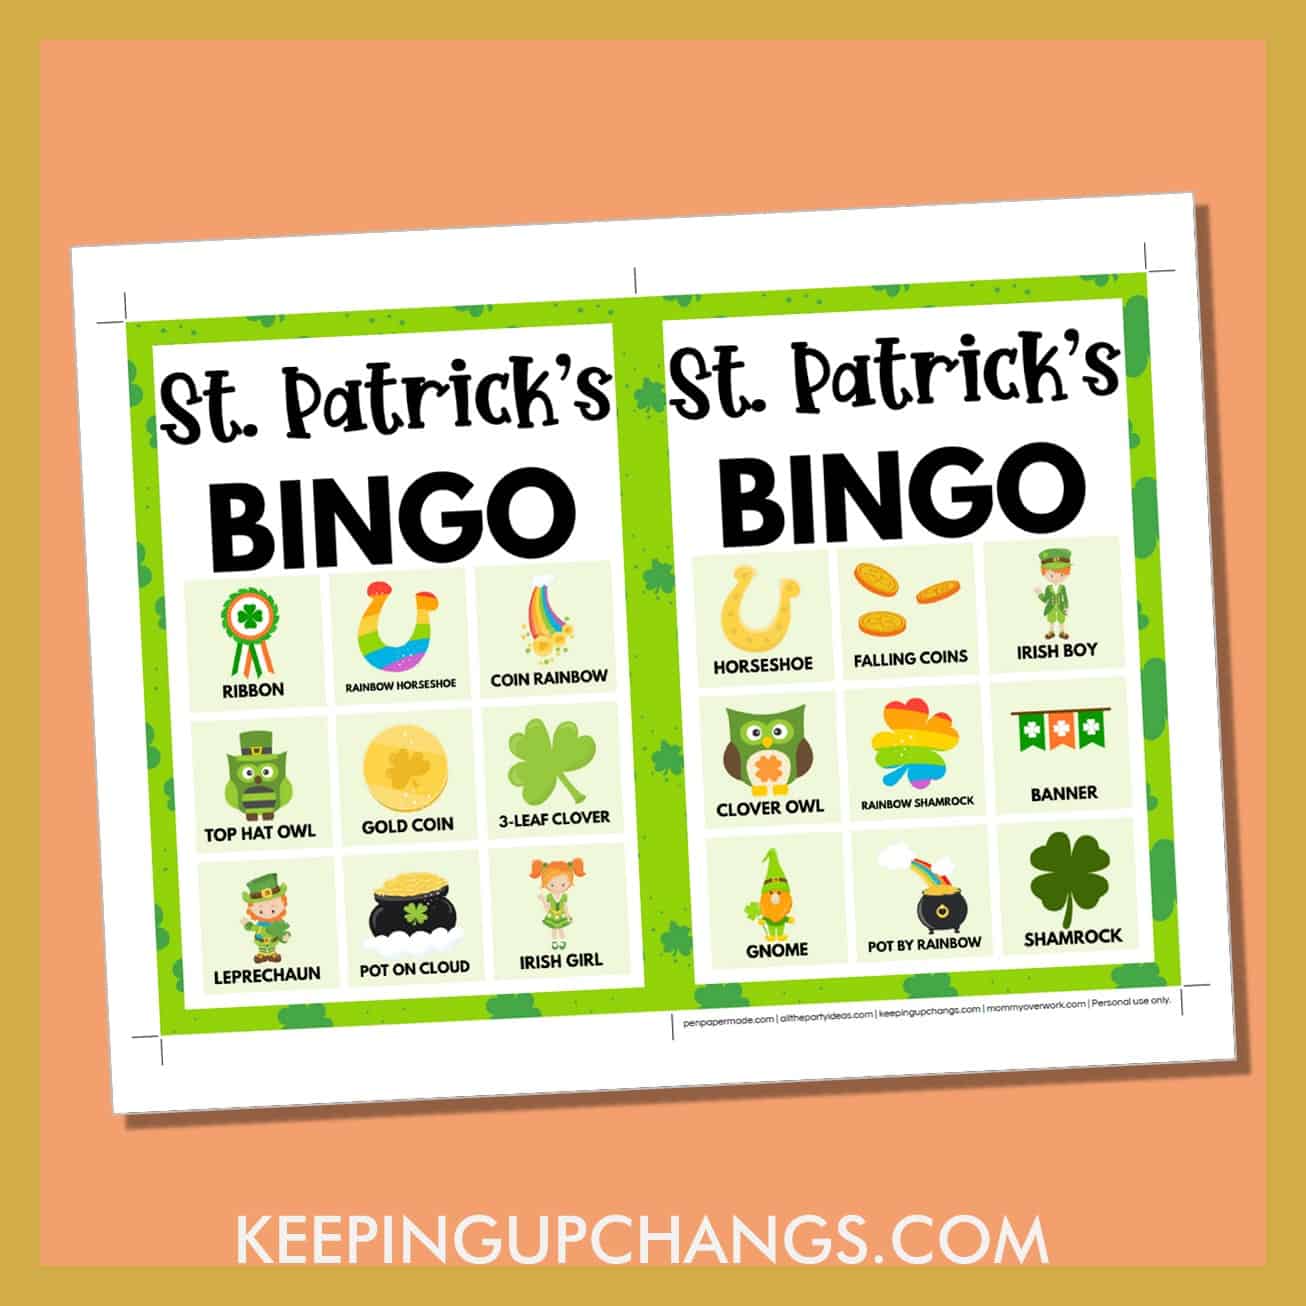 free st patrick's day bingo card 3x3 5x7 game boards with images and text words.